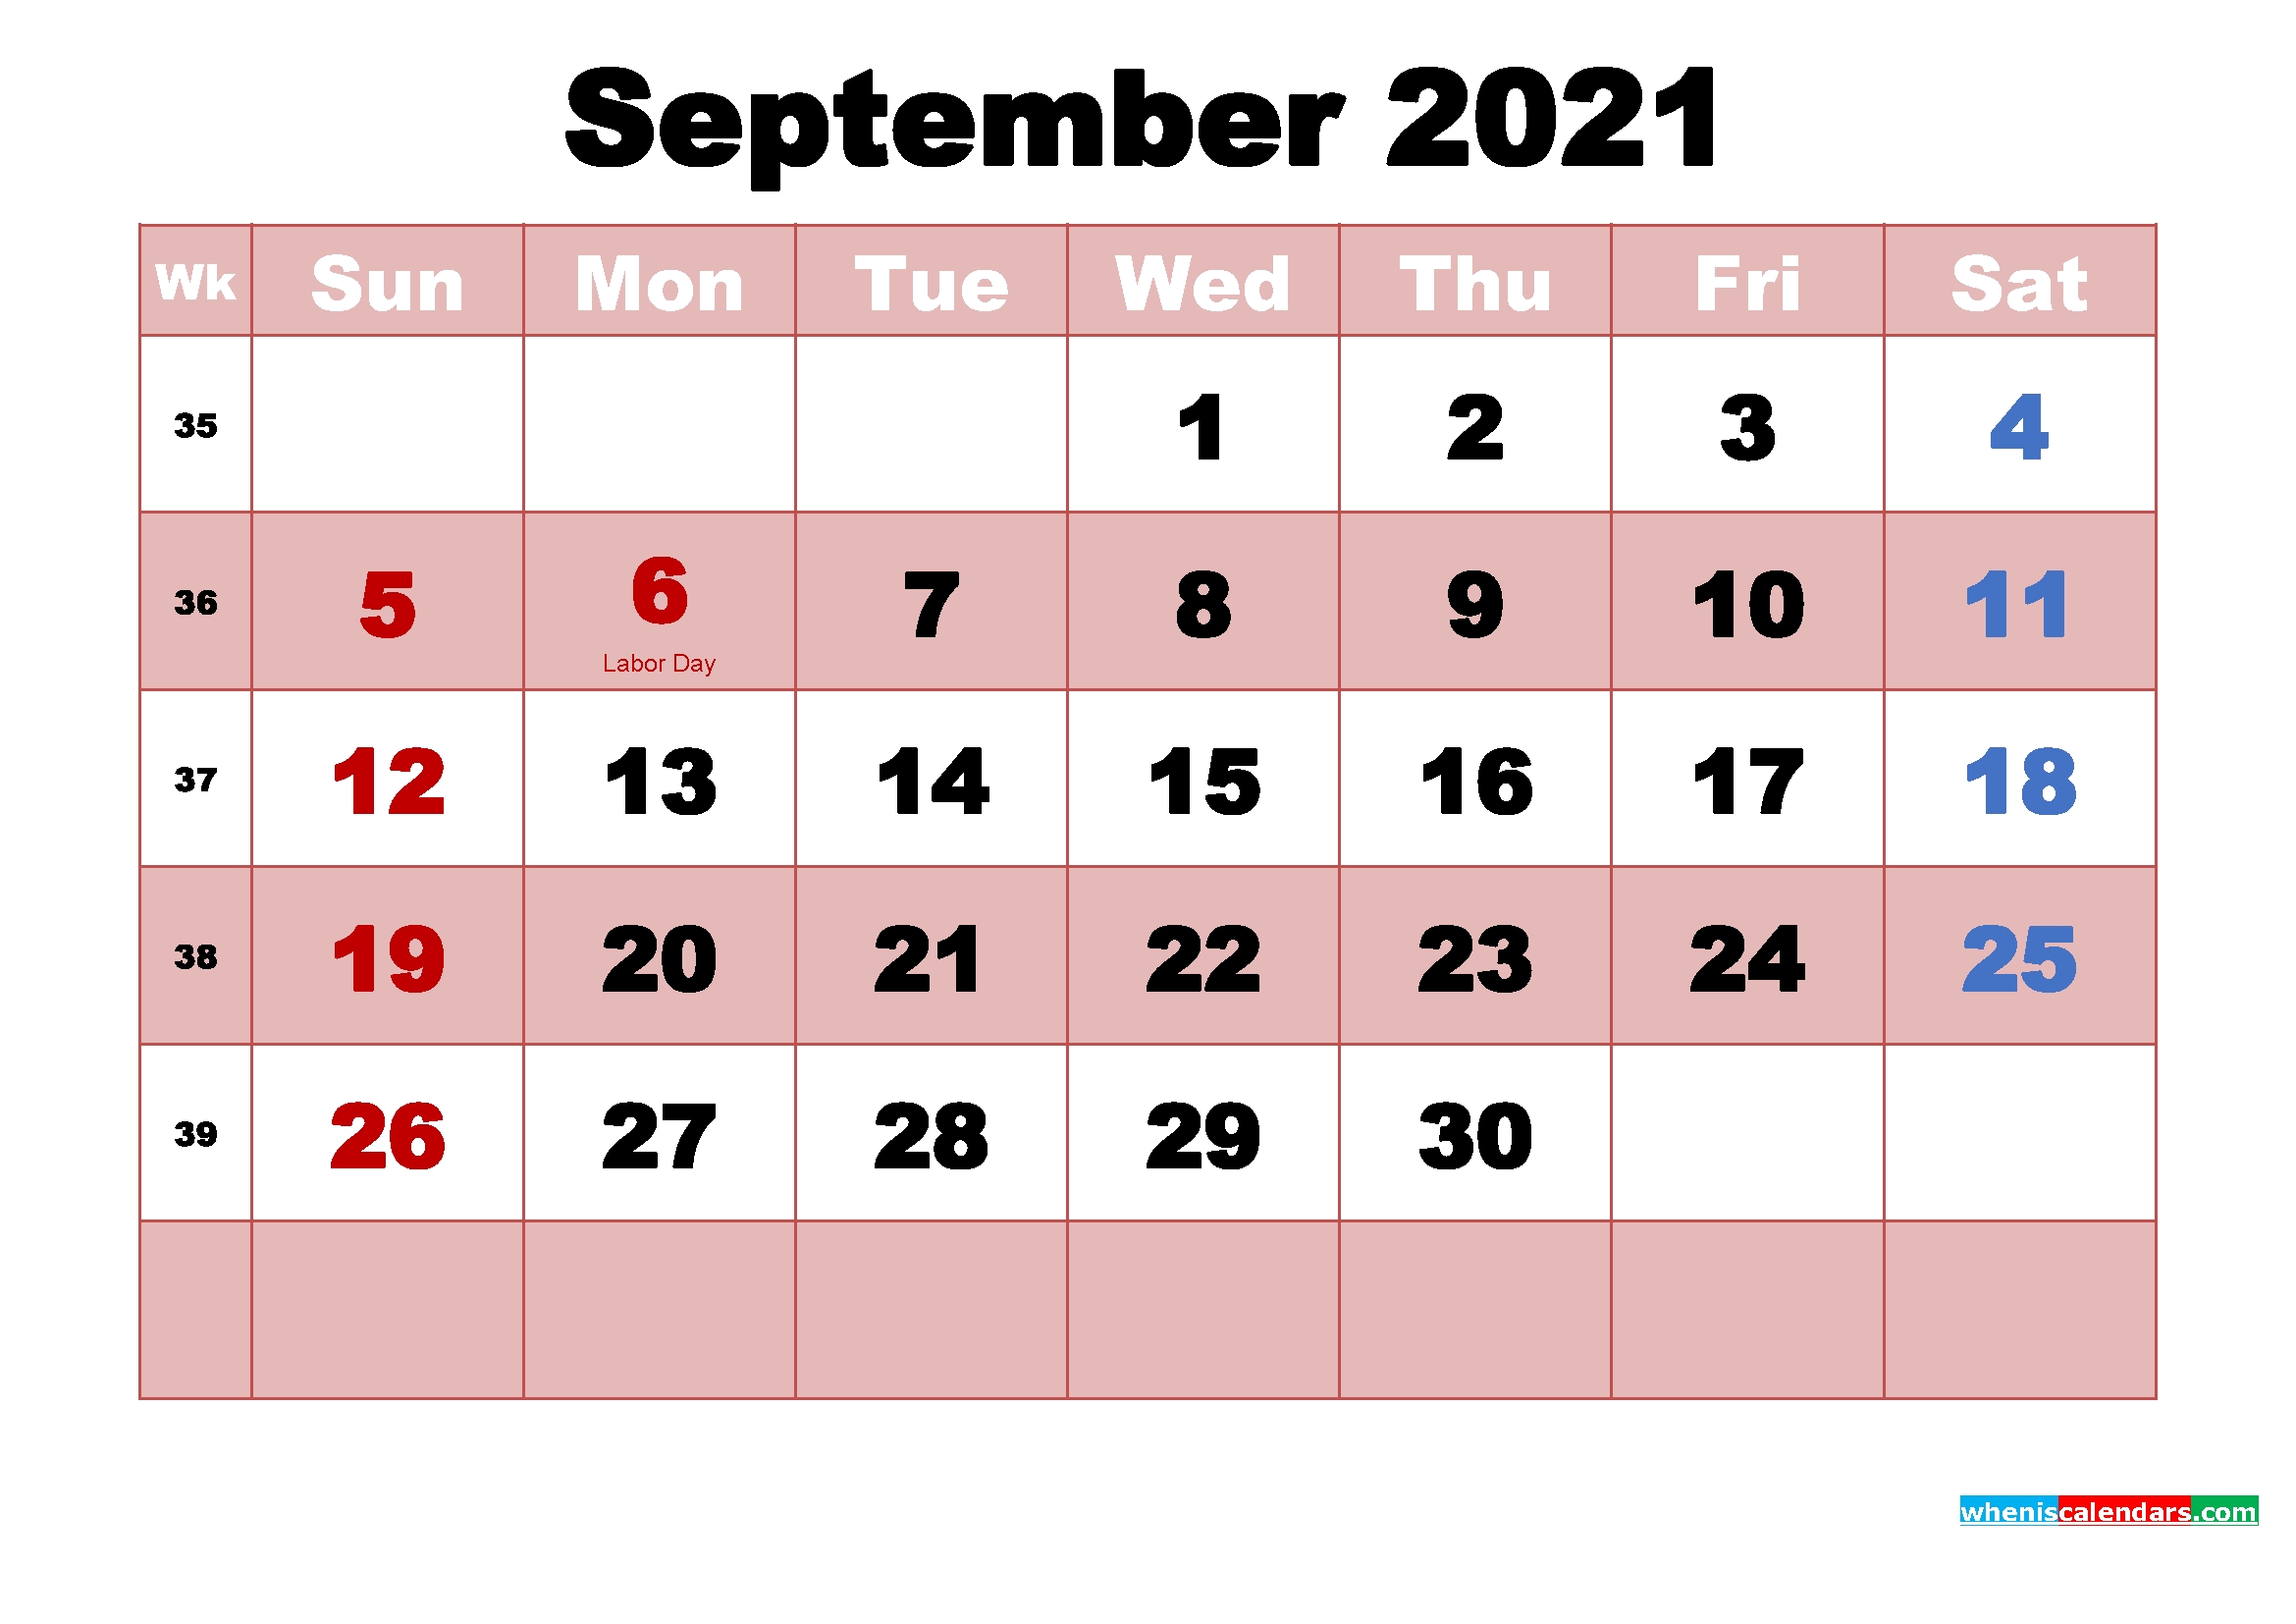 September 2021 Printable Monthly Calendar With Holidays | Free Printable 2020 Calendar With Holidays Calendar Events September 2021